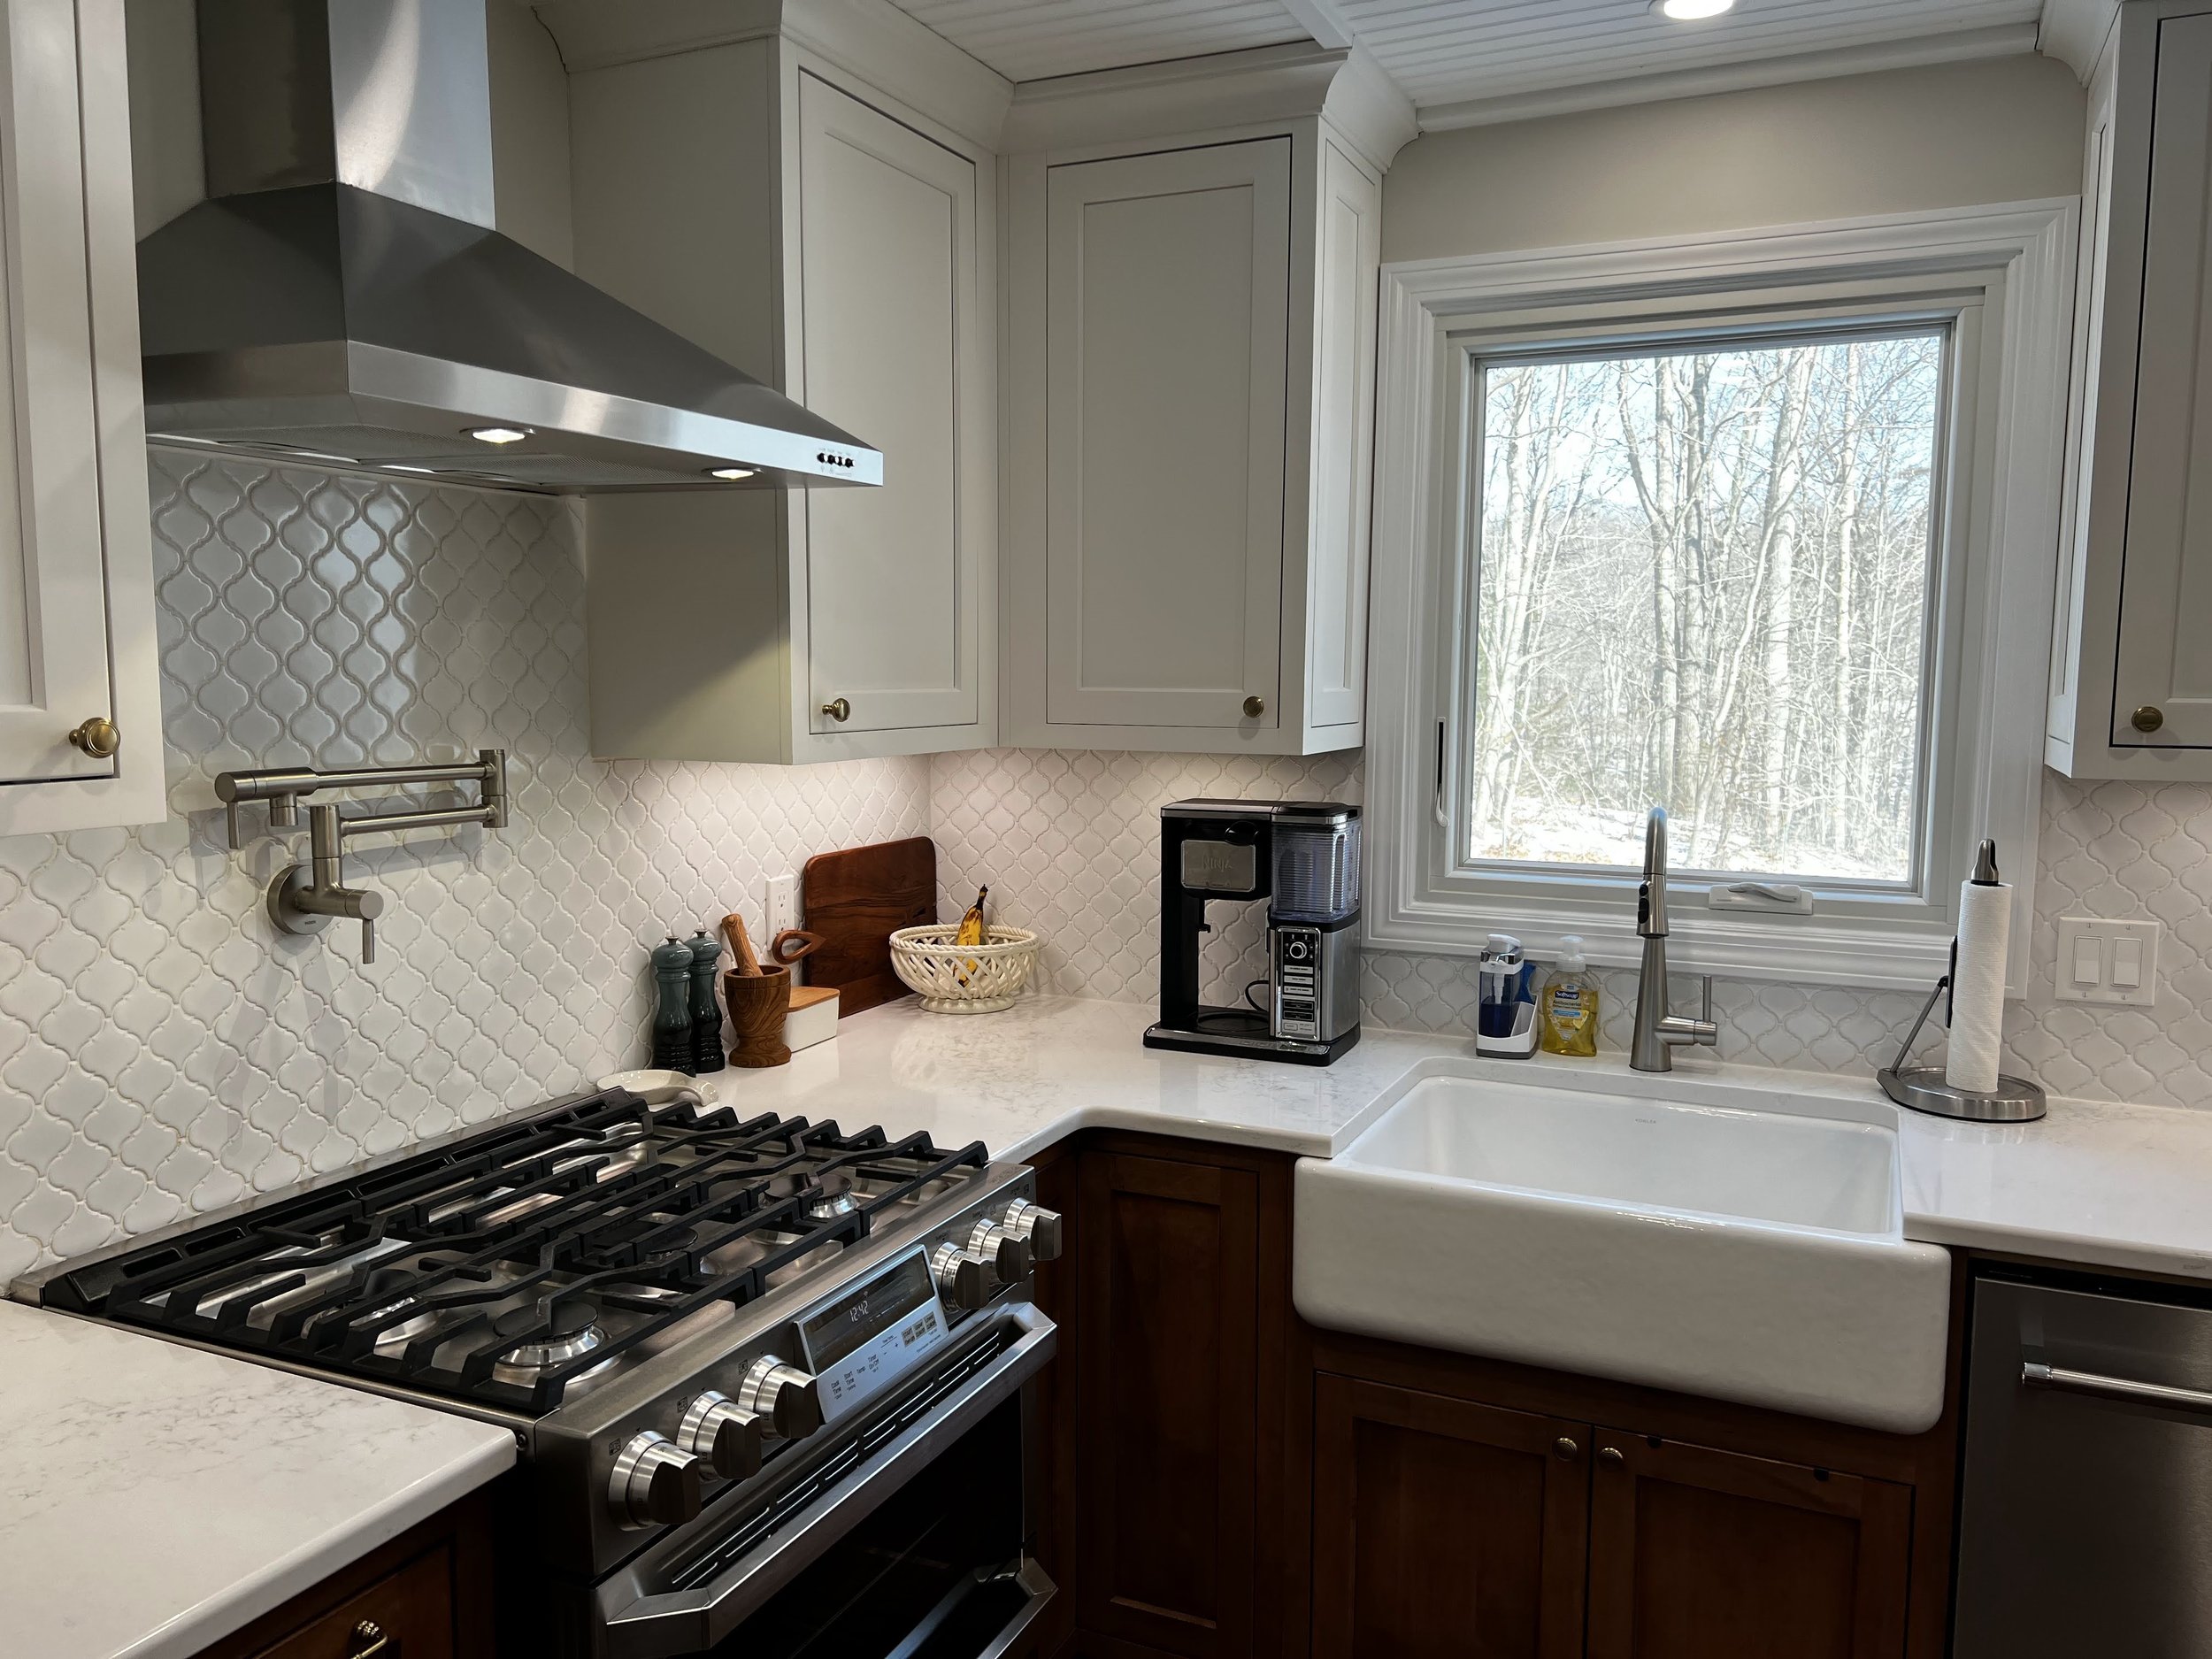 Shaw Remodeling - kitchen design renovations in Niantic East Lyme Old Lyme CT before and after photos makeover (15).jpg